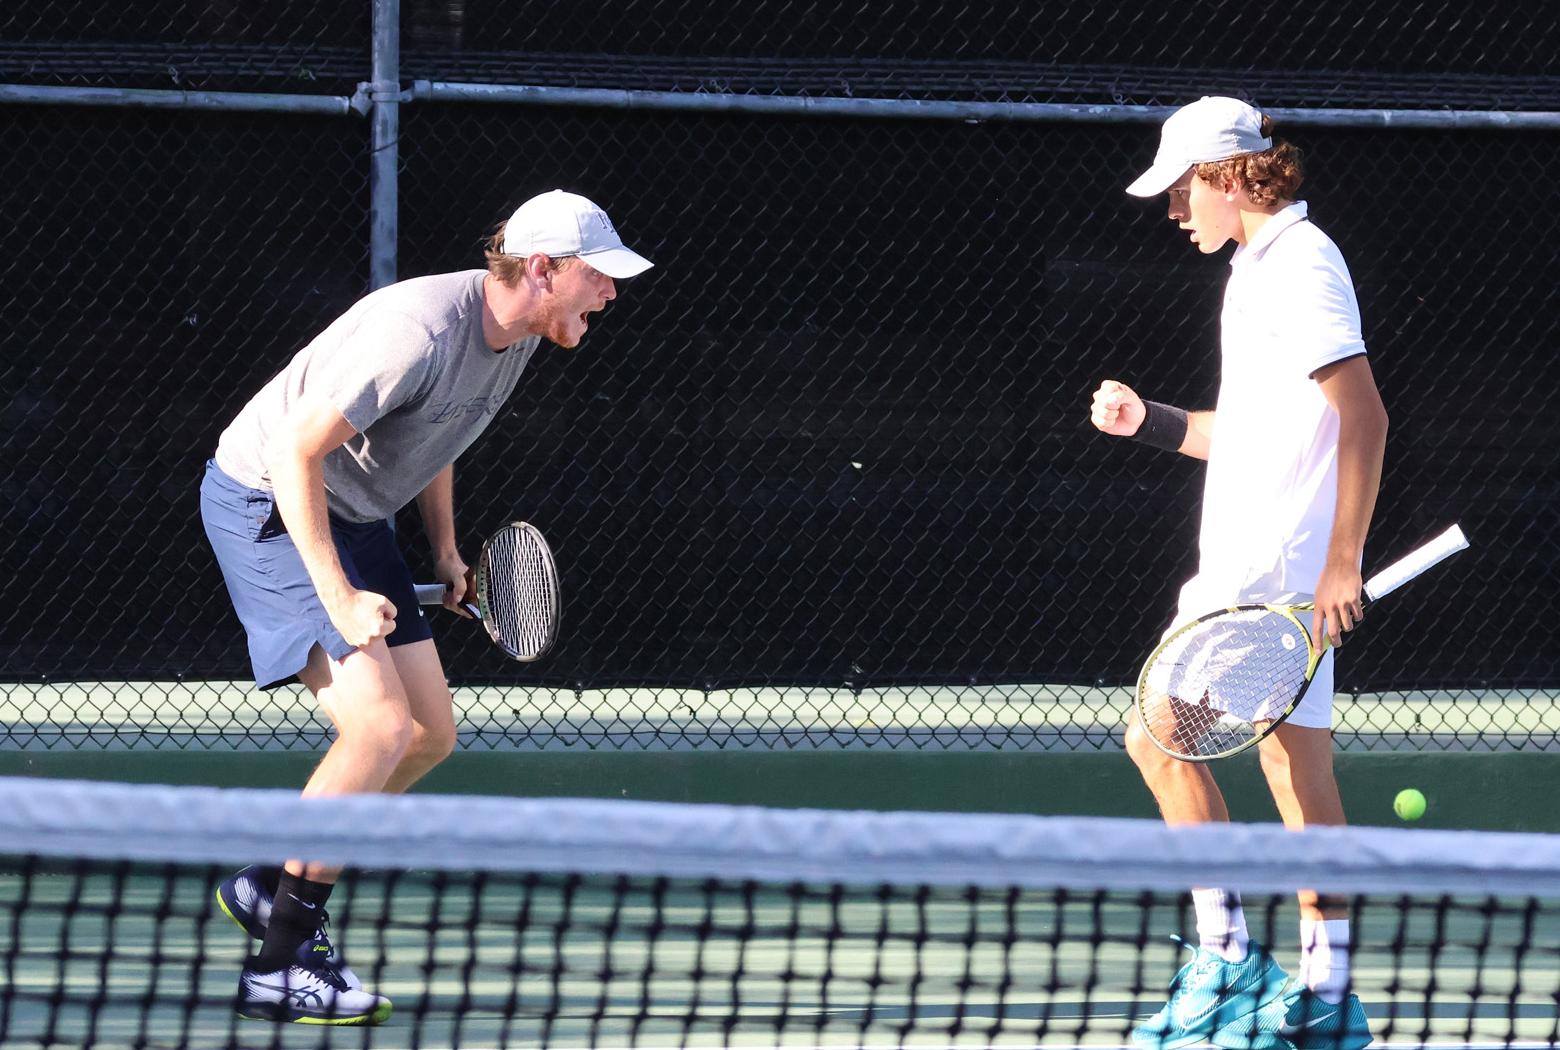 Men's tennis team is ranked third in state, Grove/Pardo are No. 1